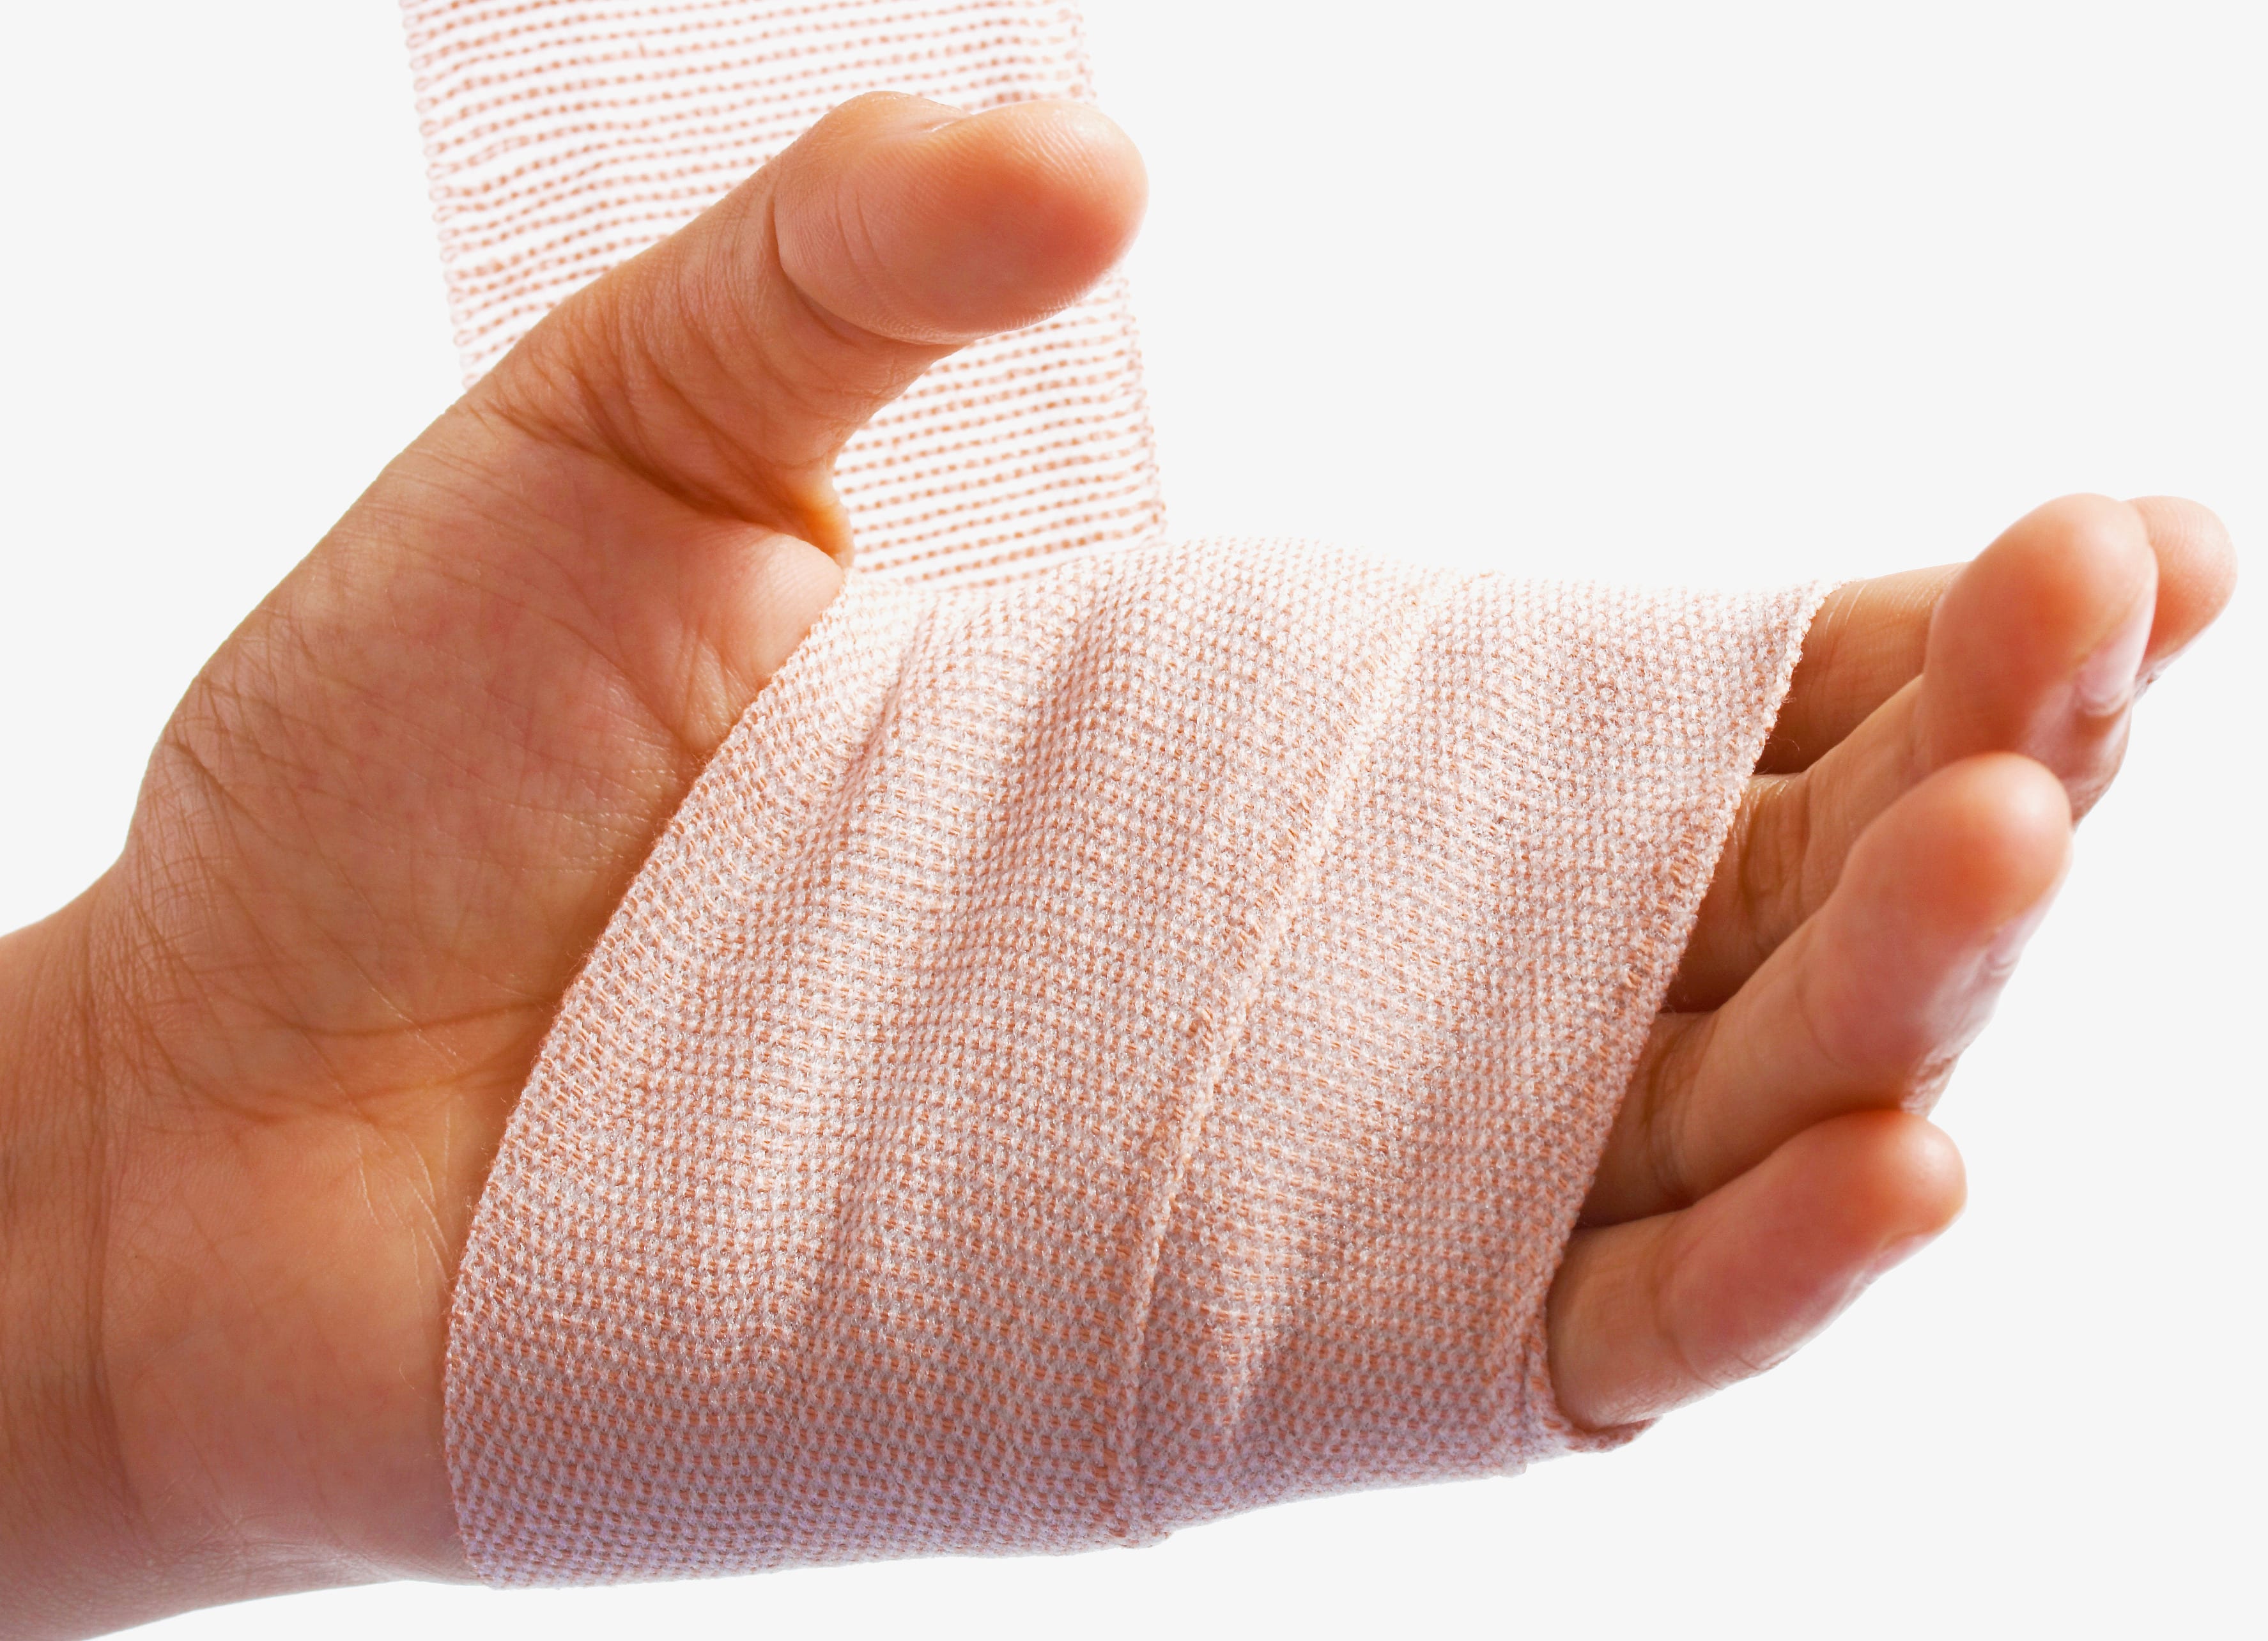 wound care treatment